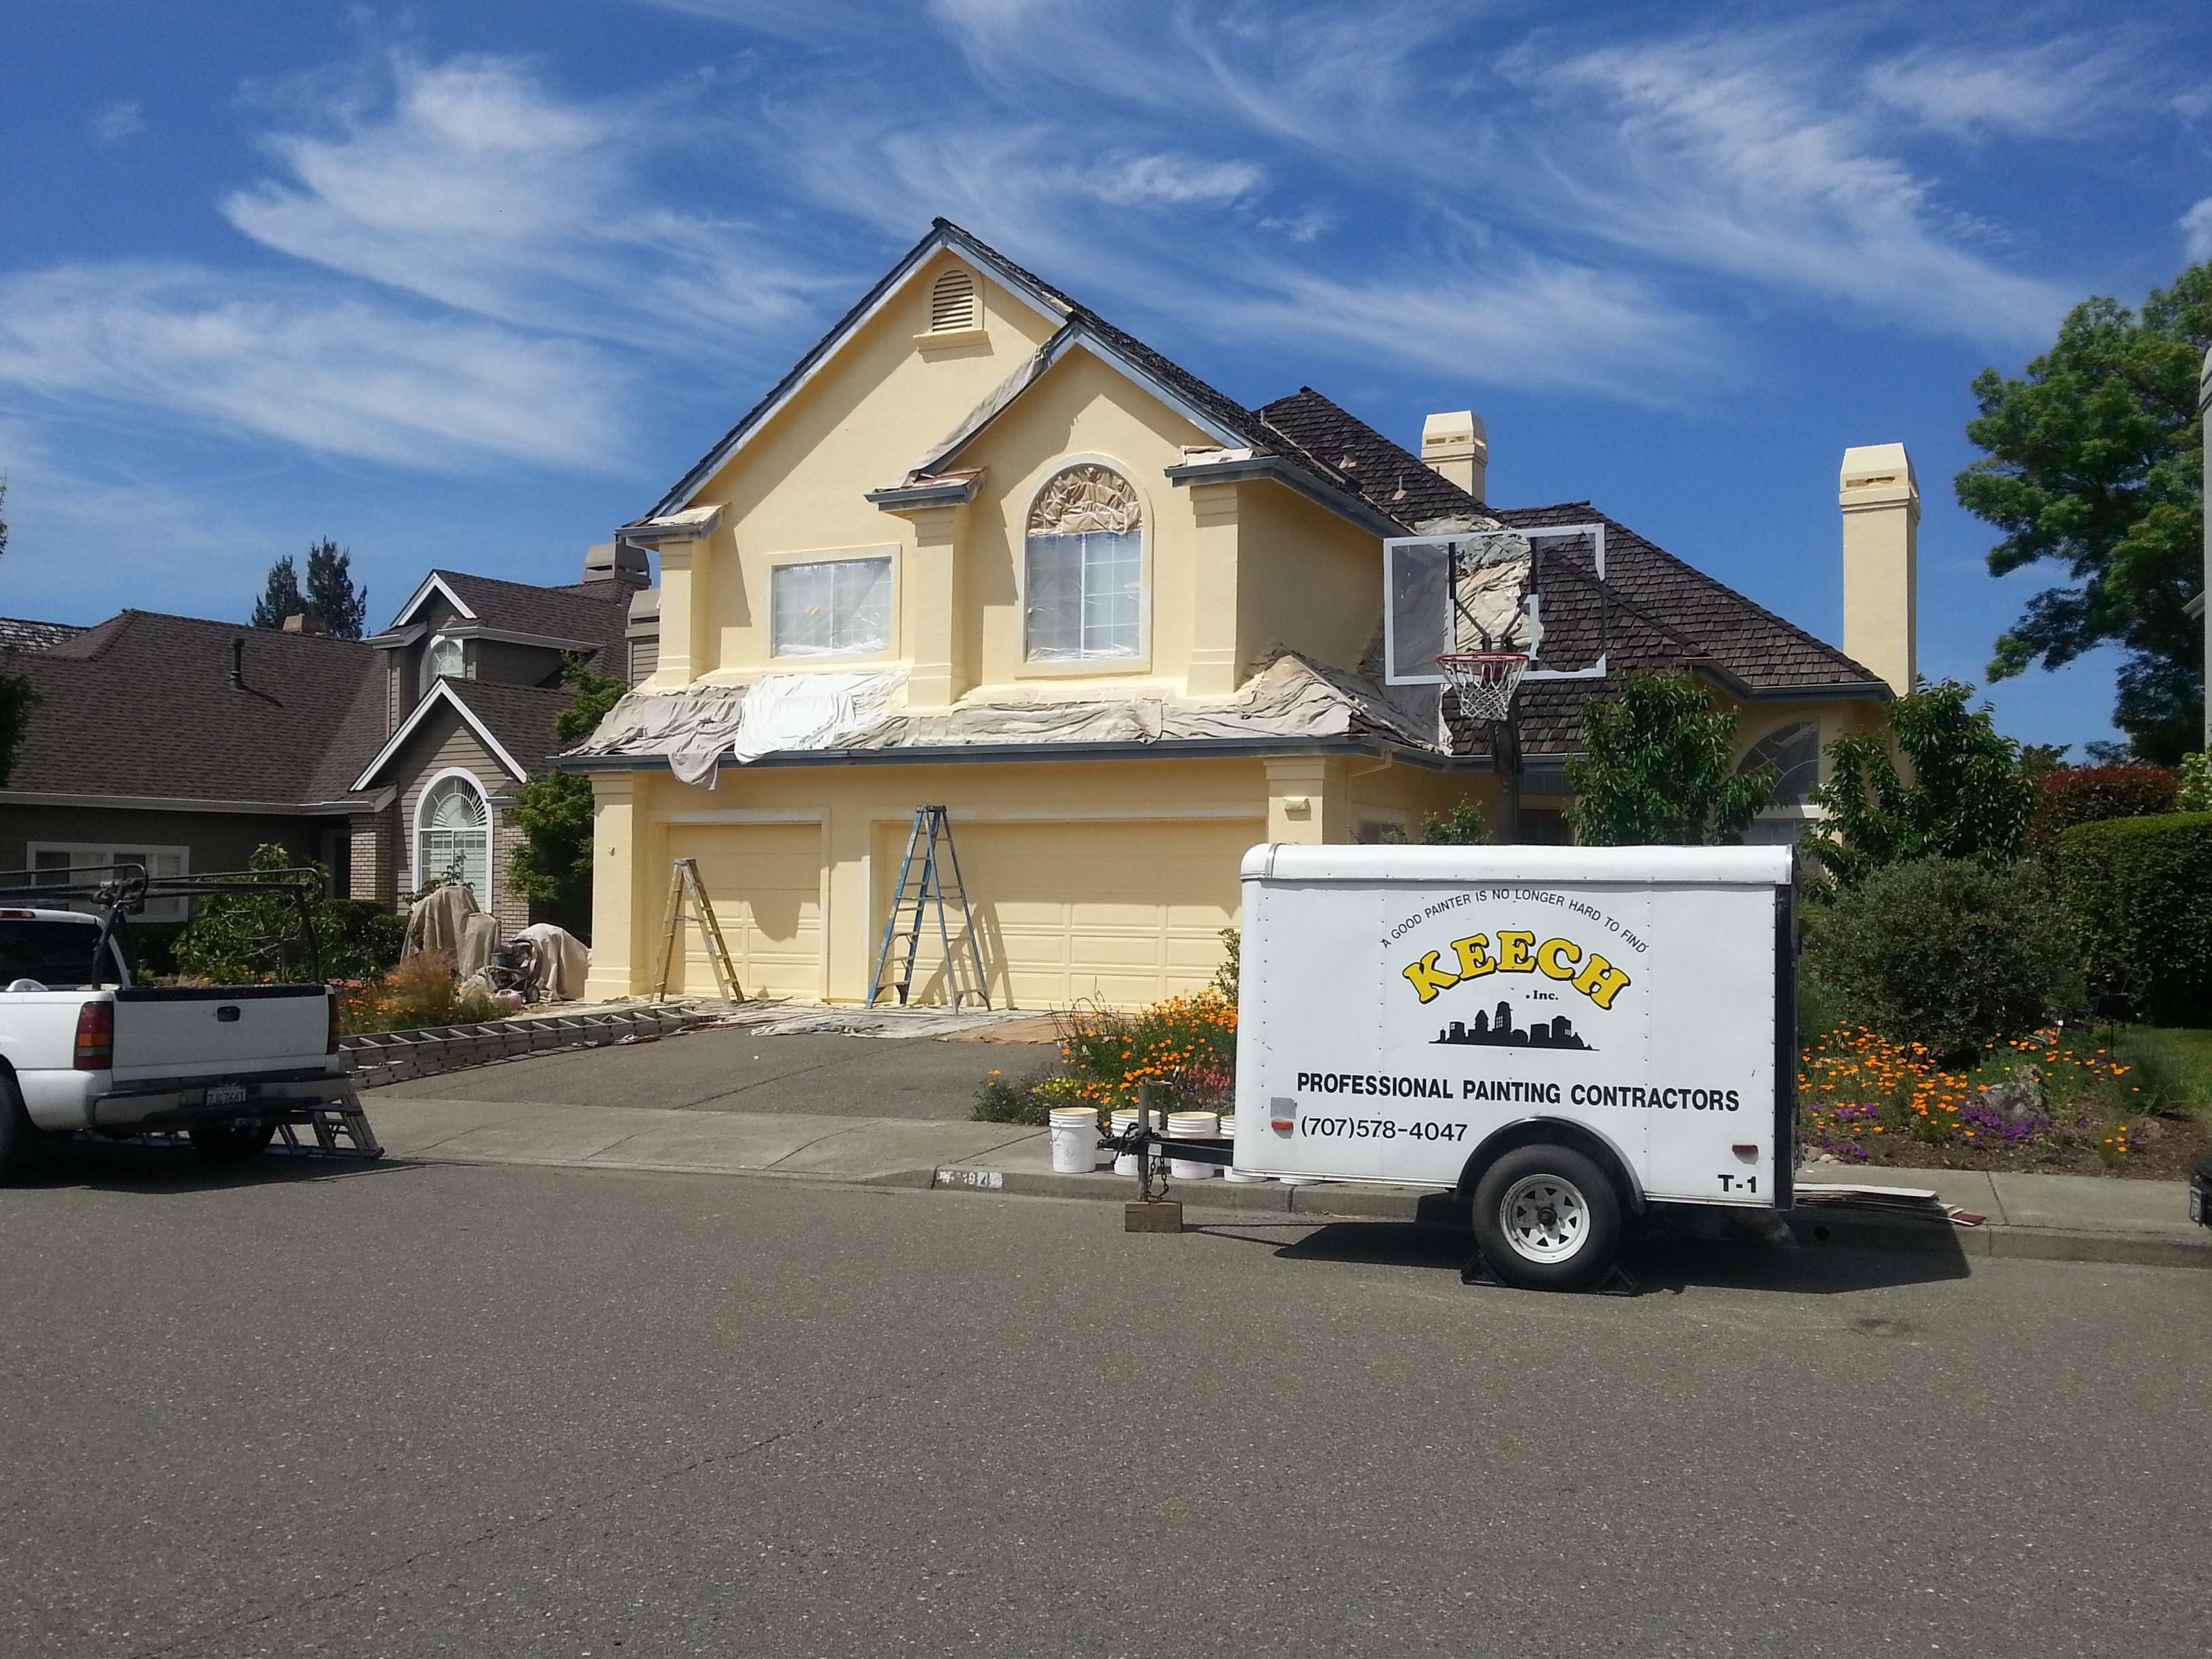 Picture of Keech Painting Contractors, Inc. - Keech Painting Contractors, Inc.